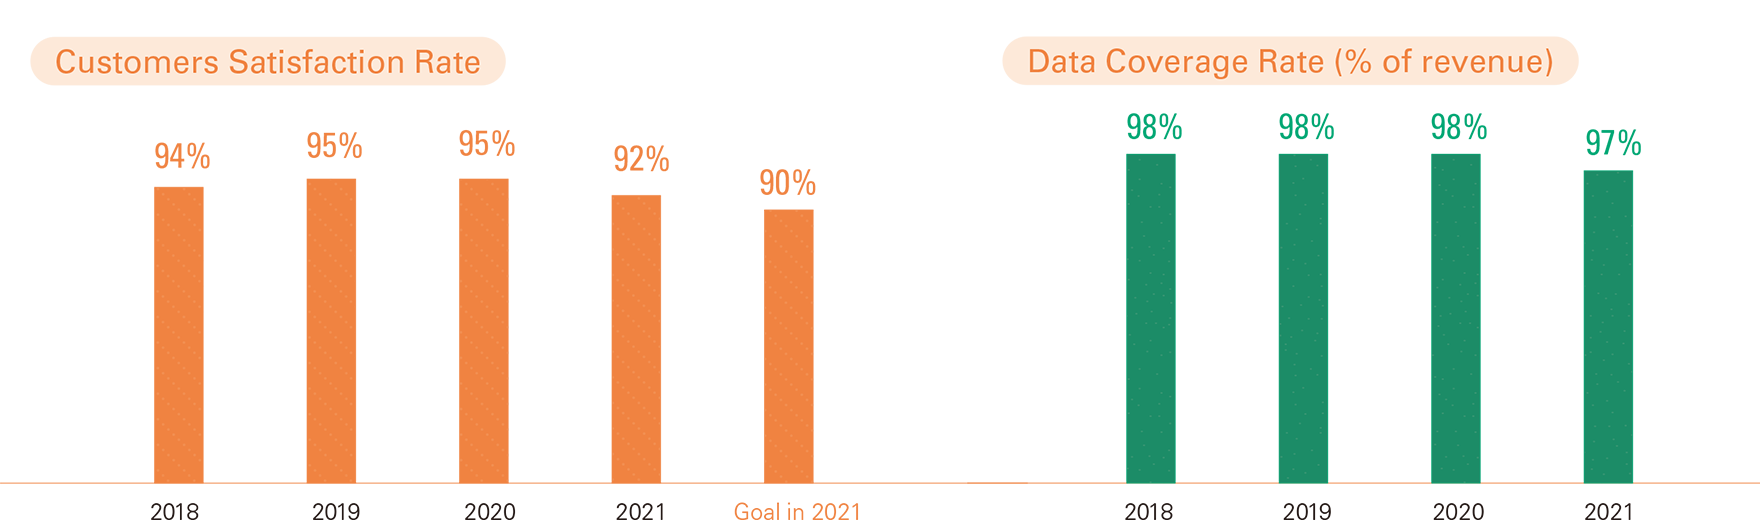 Customers Satisfaction Rate and Data Coverage Rate of revenue